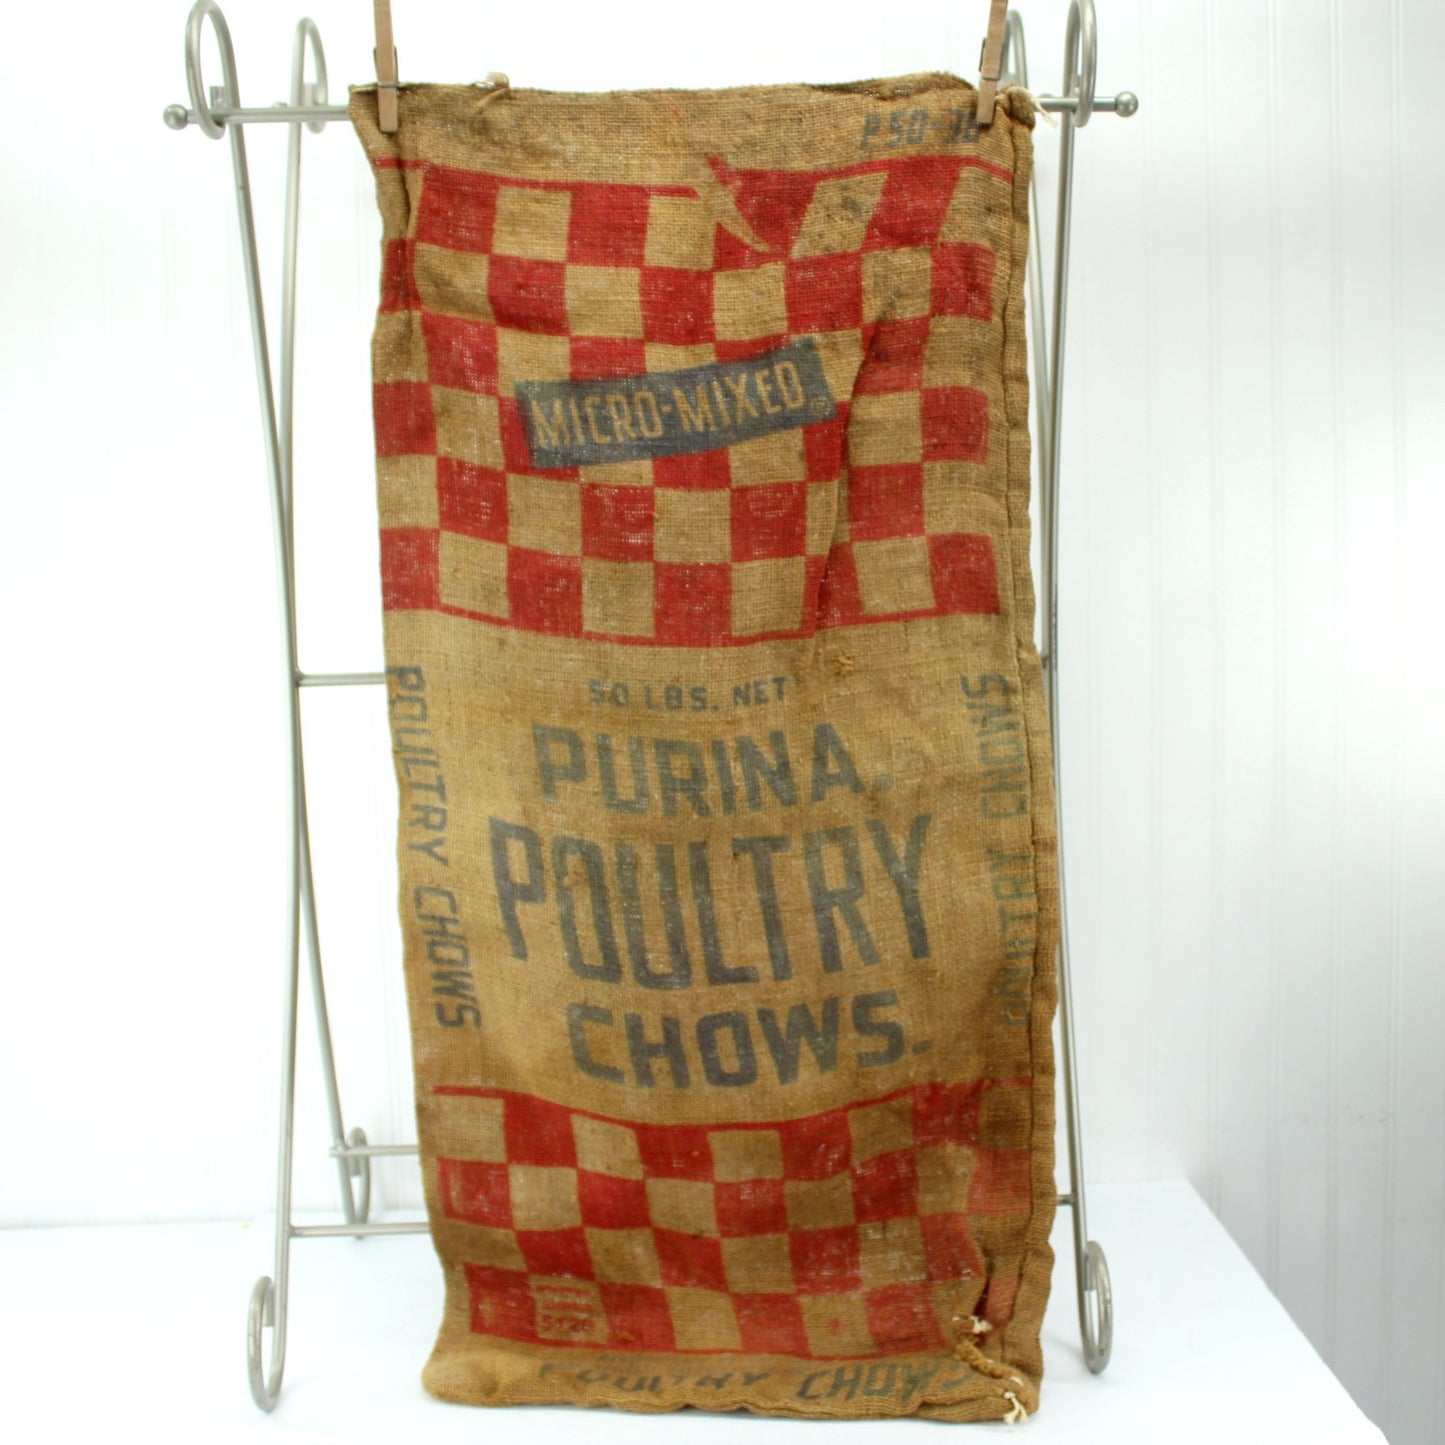 Purina Vintage Poultry Chows Burlap Feed Bag 50# Size full view